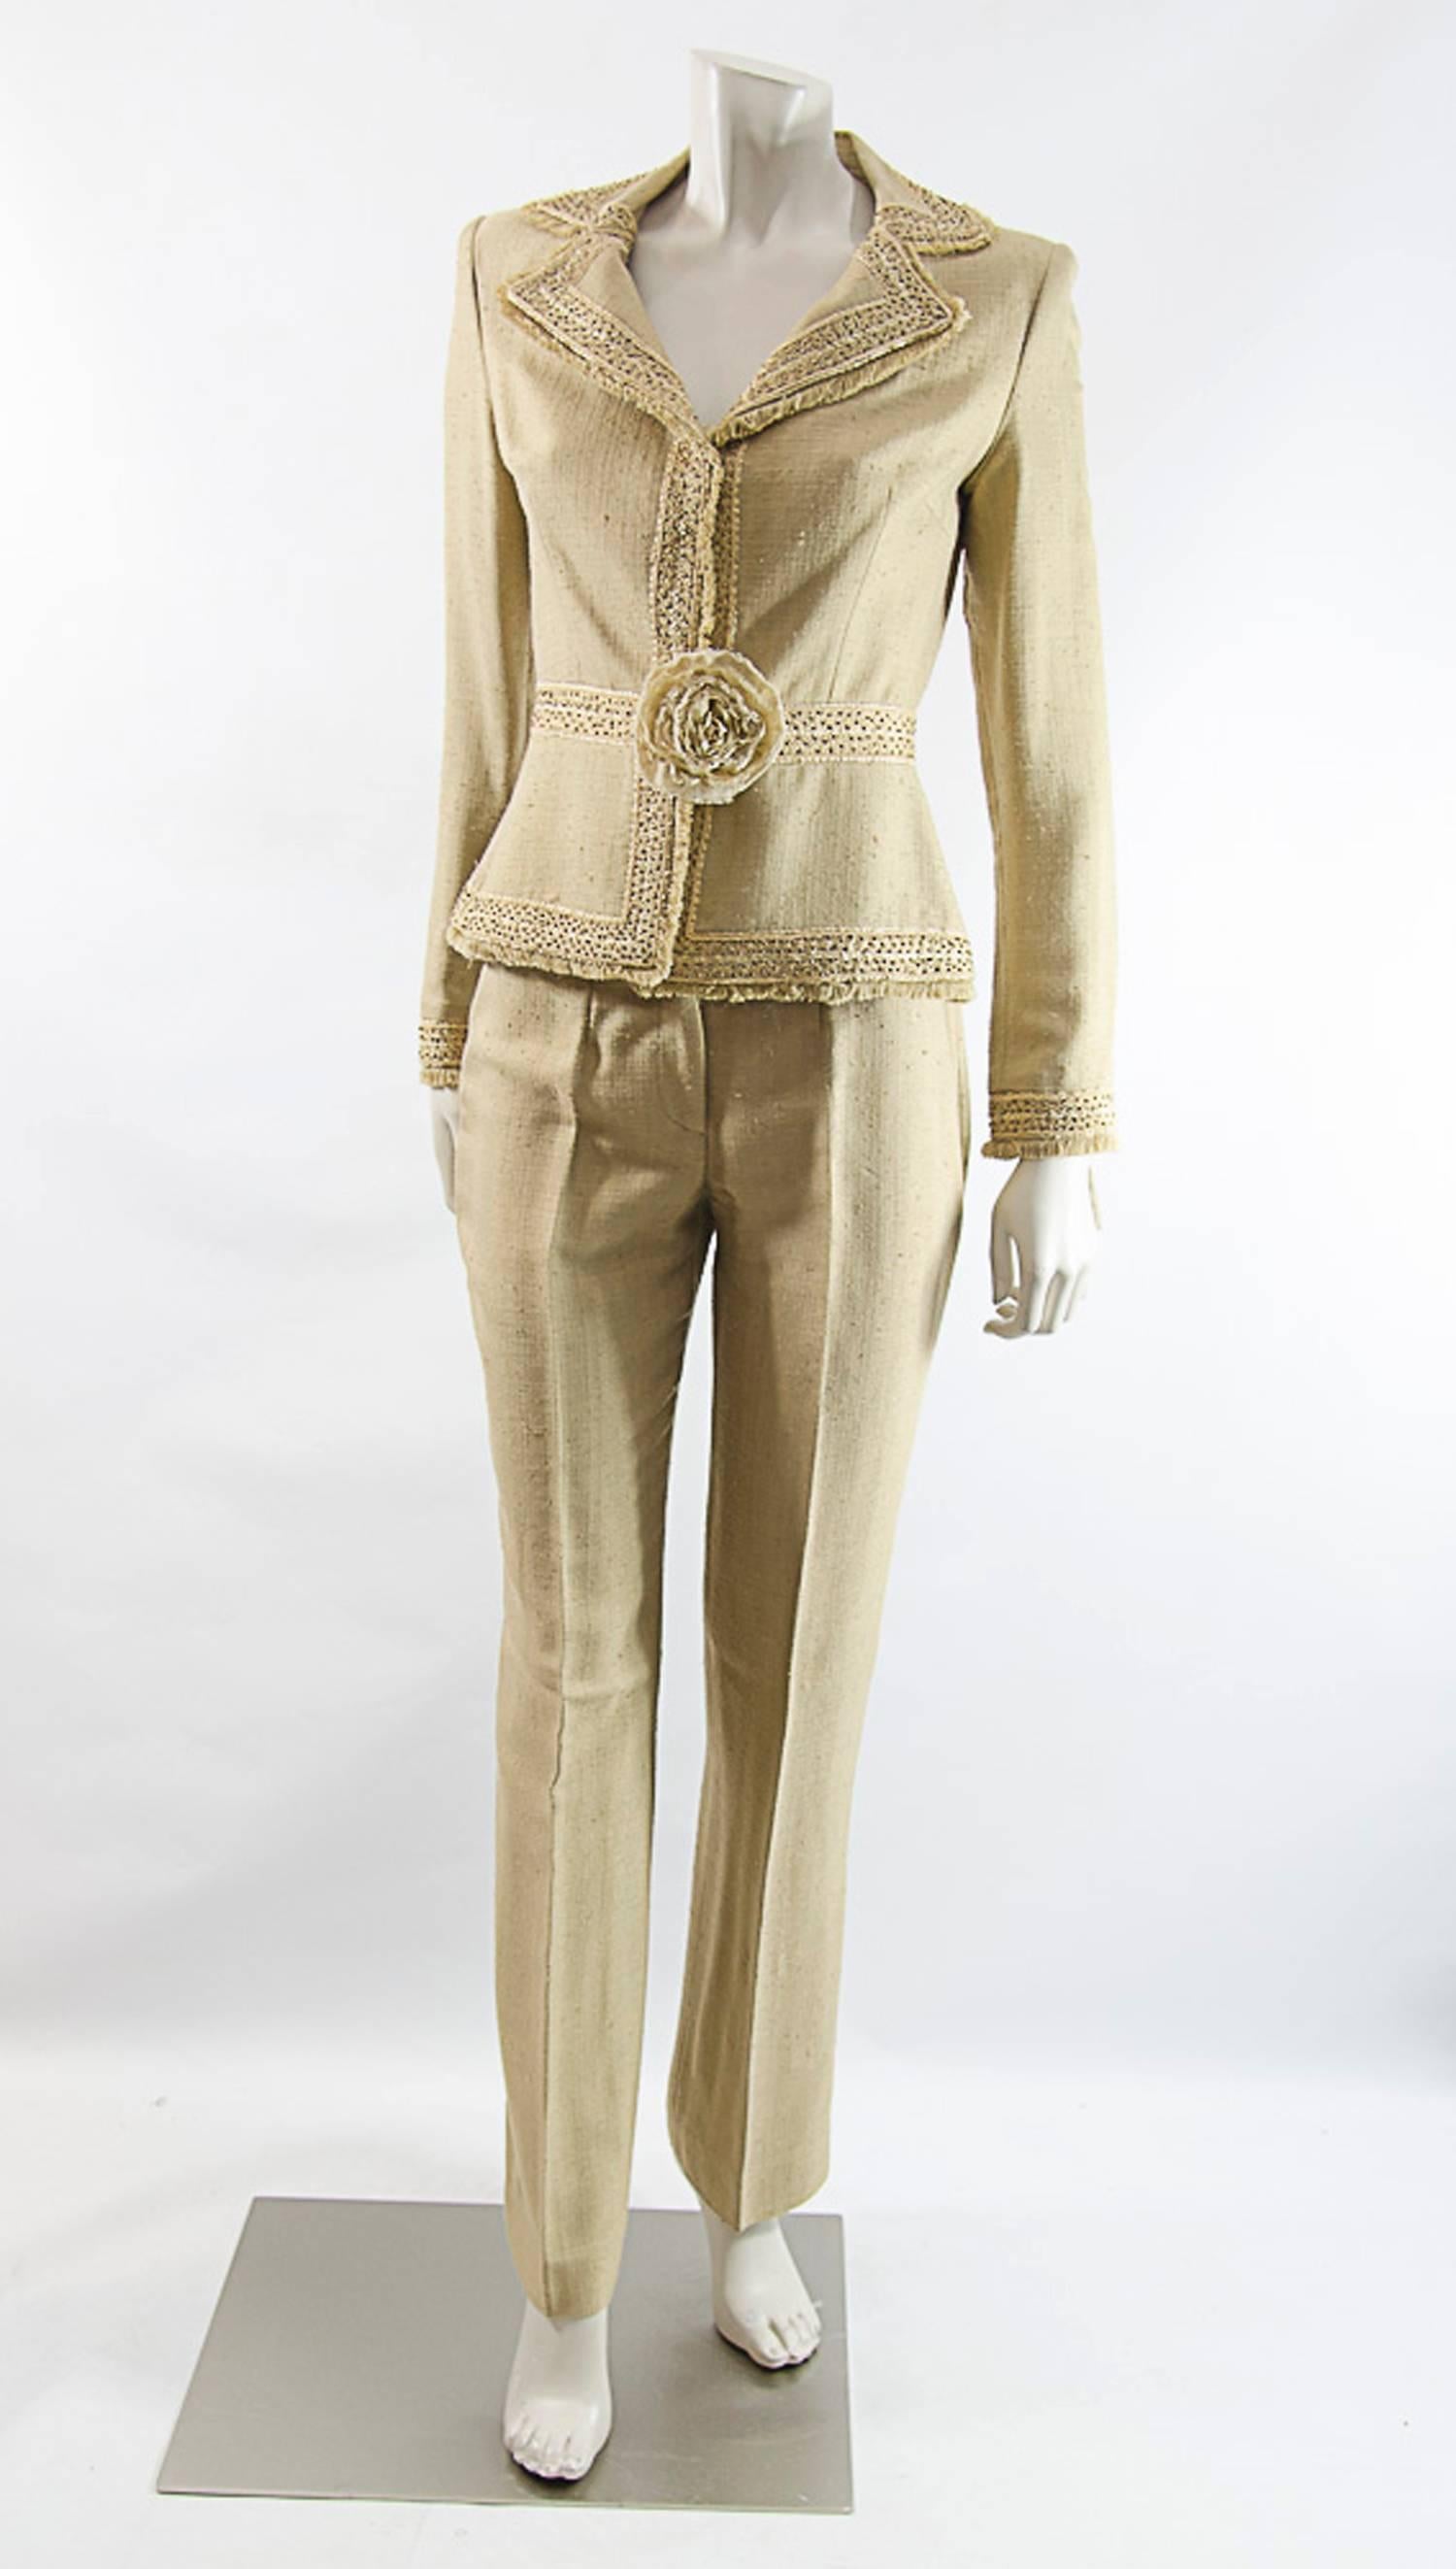 Naeem Khan has established a loyal celebrity following---Jennifer Lopez, Eva Longoria, Beyonce, and Queen Noor of Jordan. He created most elegant pieces of clothing as this silk pant suit embellished with hand beaded trim, hidden closure anf